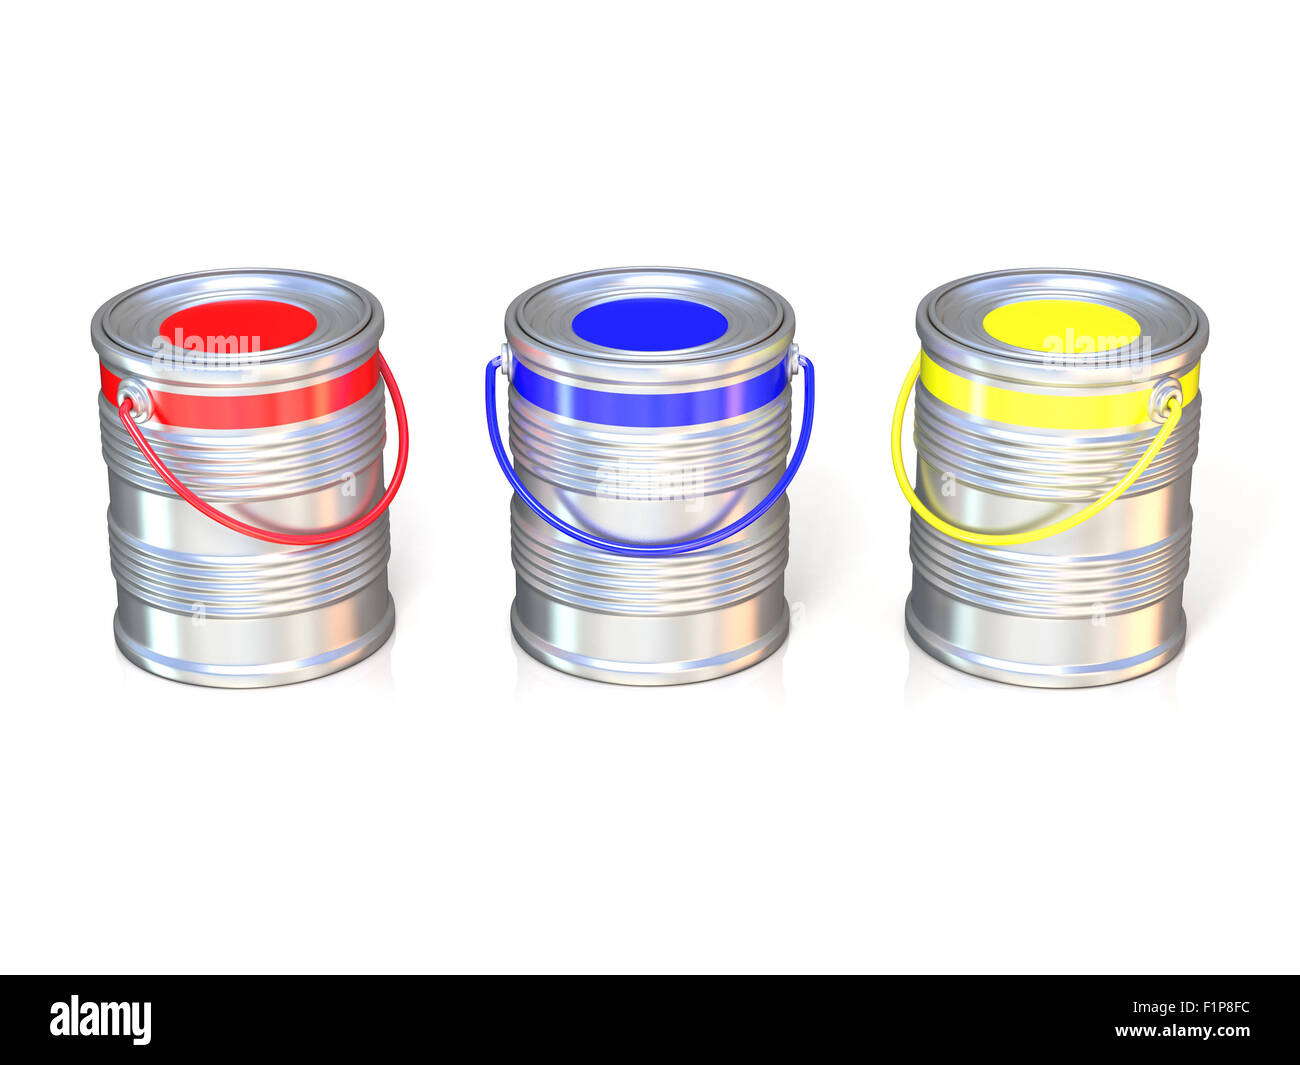 Metal tin cans with basic colors (red, blue and yellow) paint. Isolated on white background Stock Photo